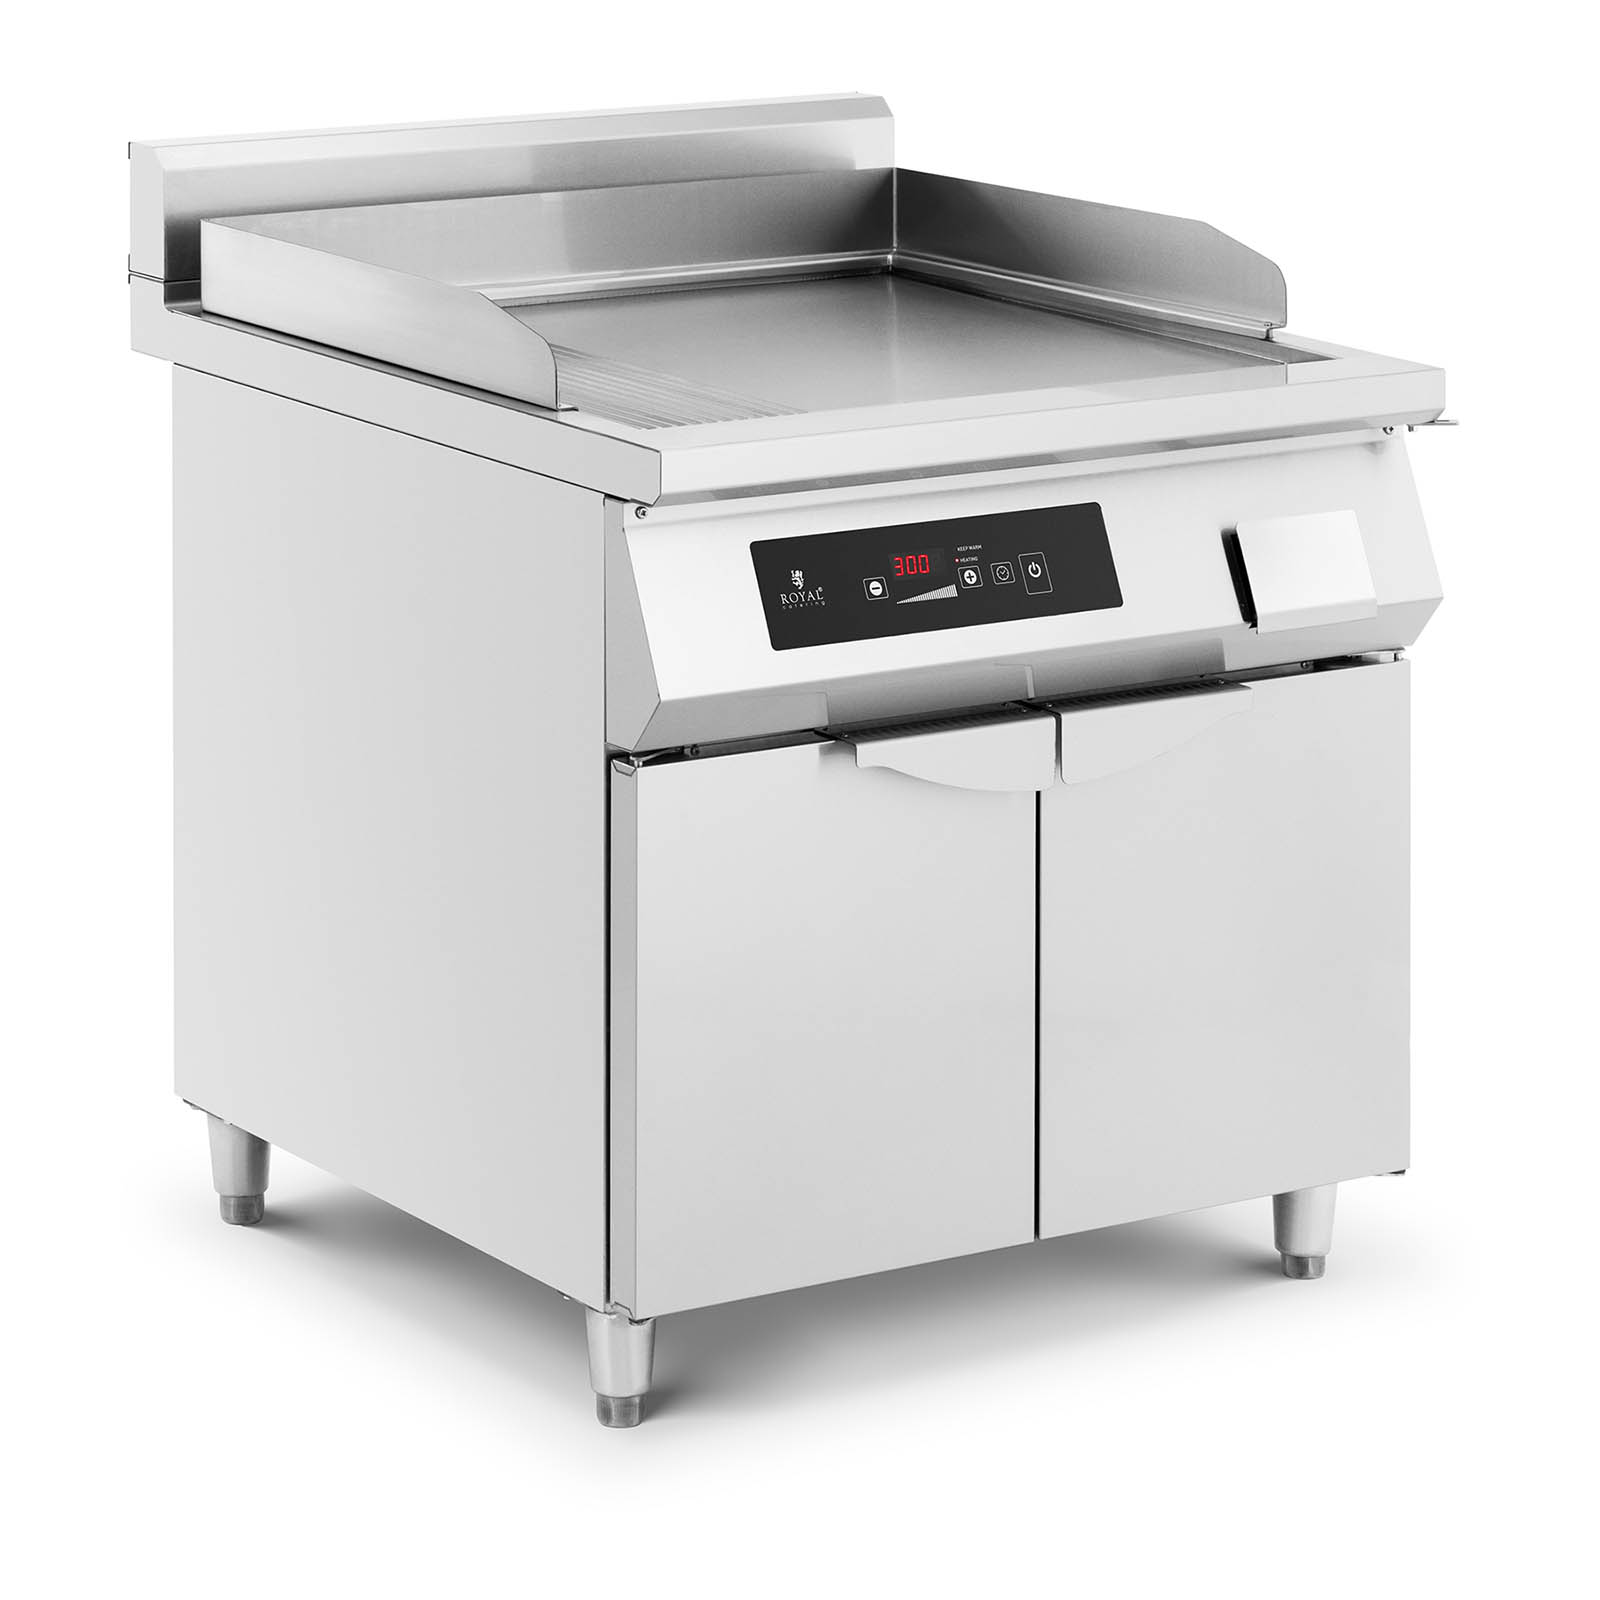 Grill professionnel - Induction - 720 x 610 mm - lisse - 10000 W - Royal Catering